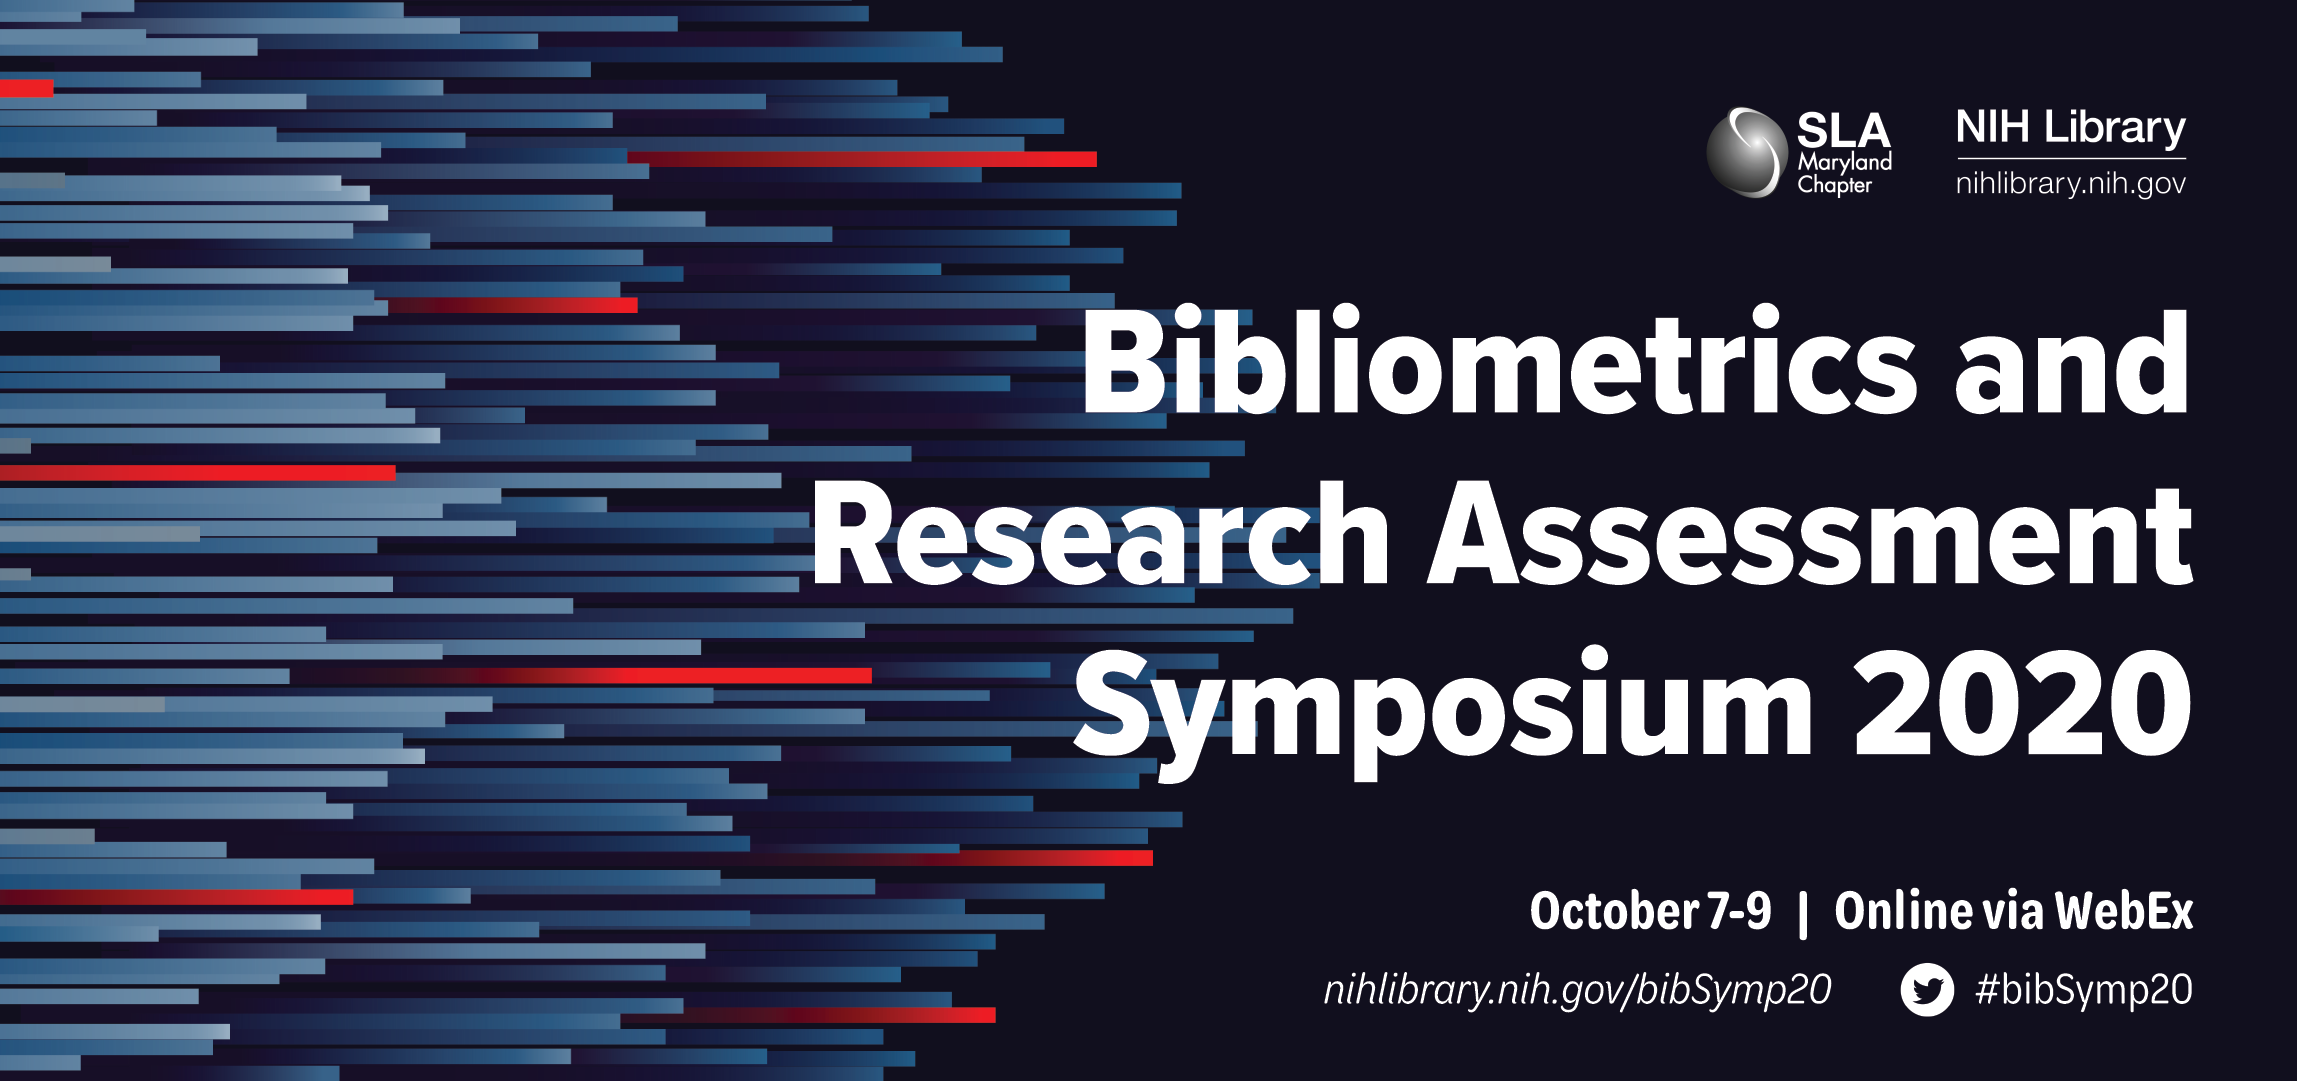 Banner for the 2020 bibliometrics and research assessment symposium